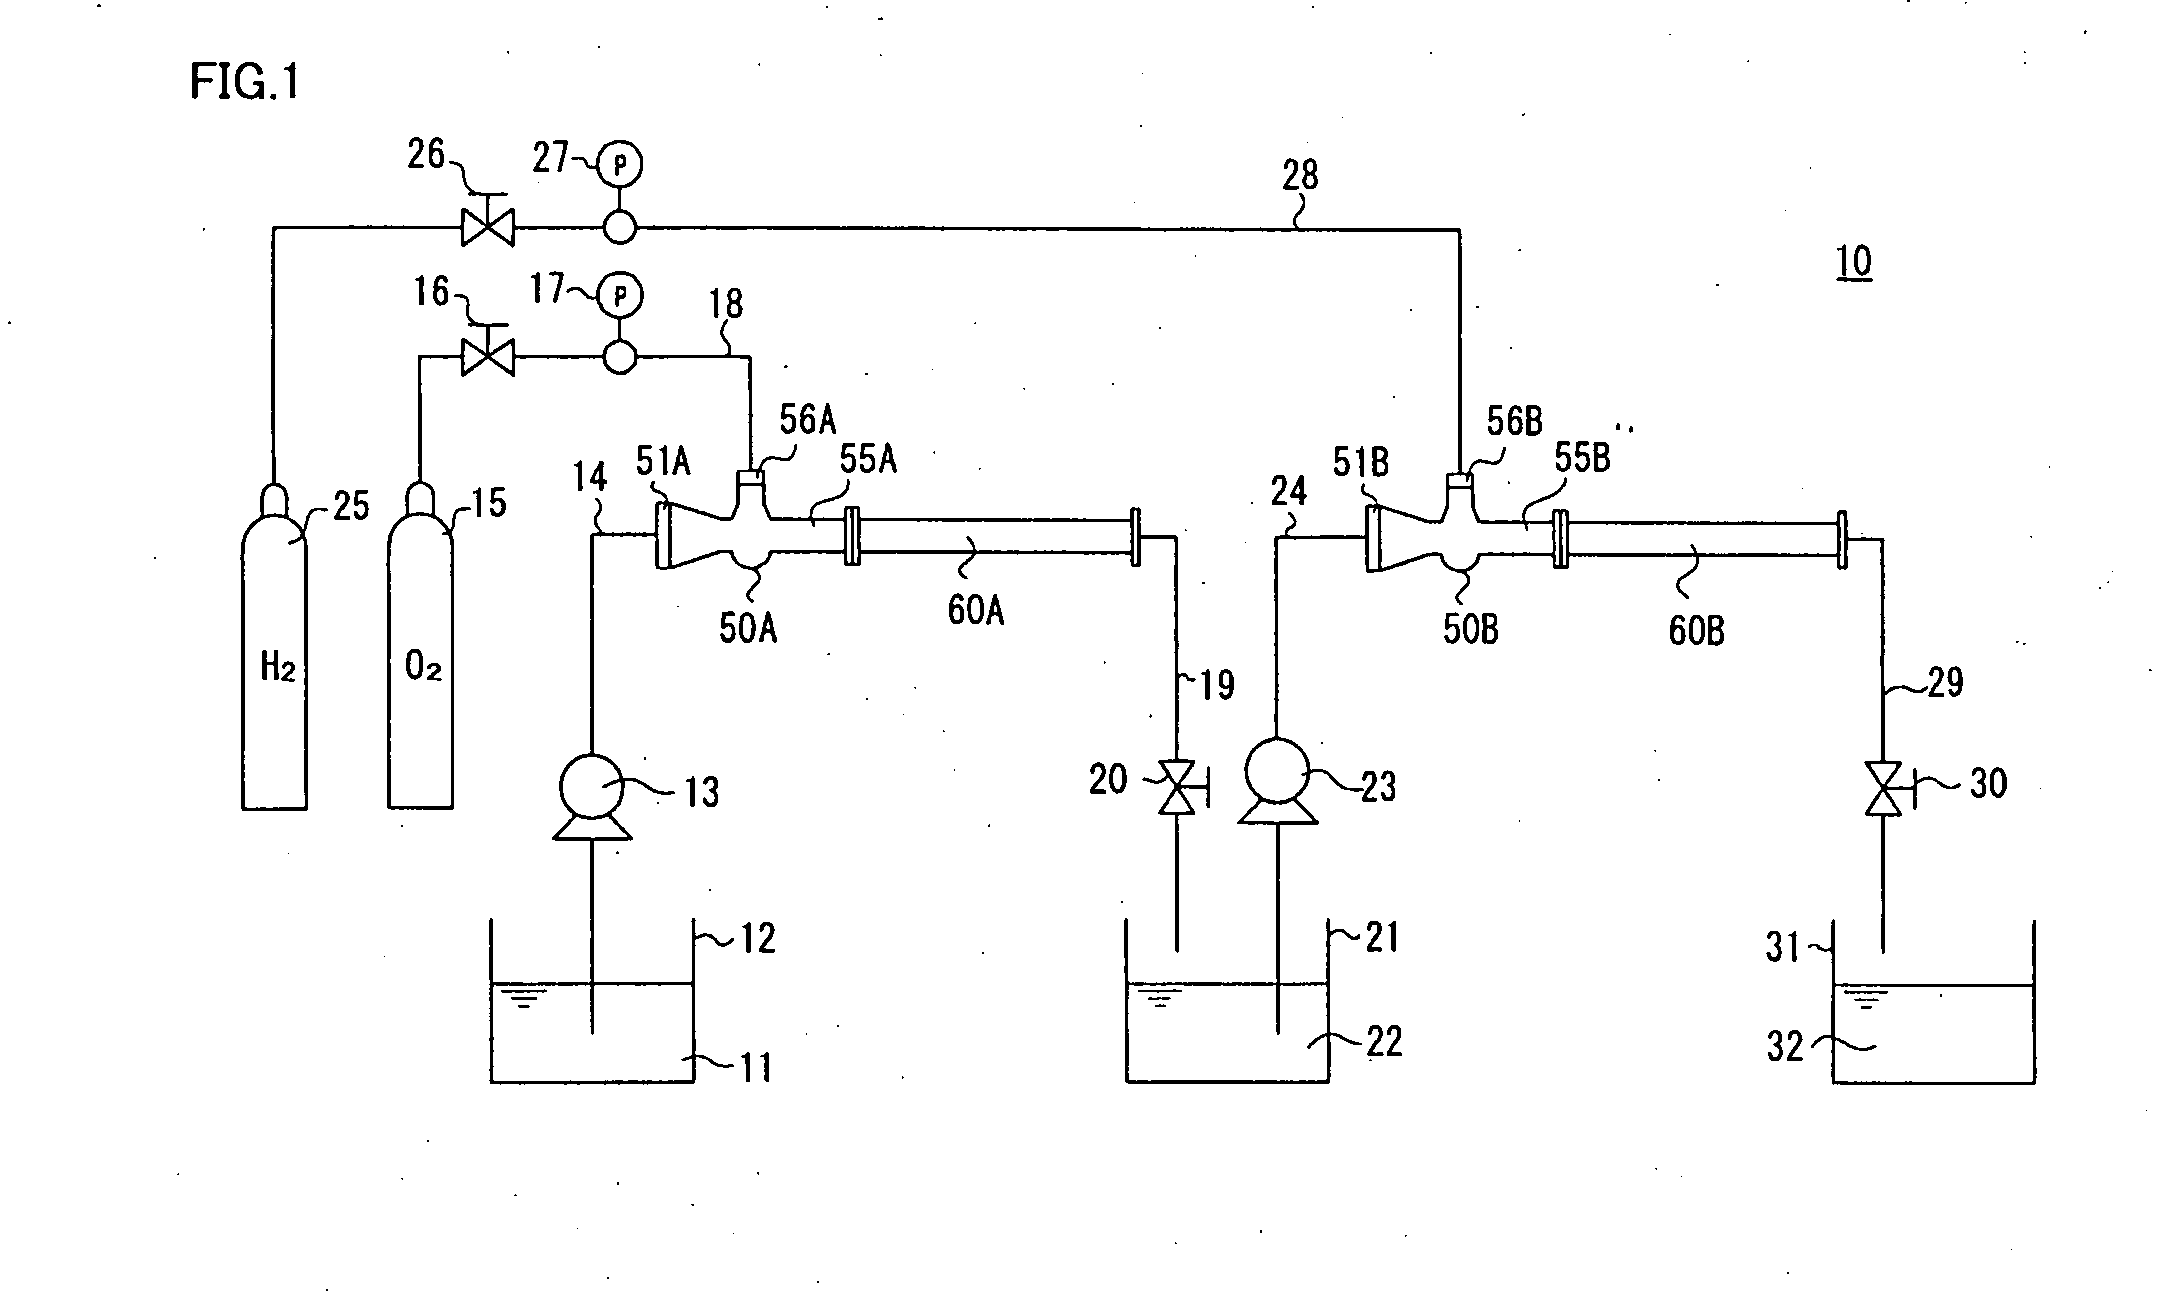 Method and Apparatus for Producing Oxygen-Containing Reducing Aqueous Beverage